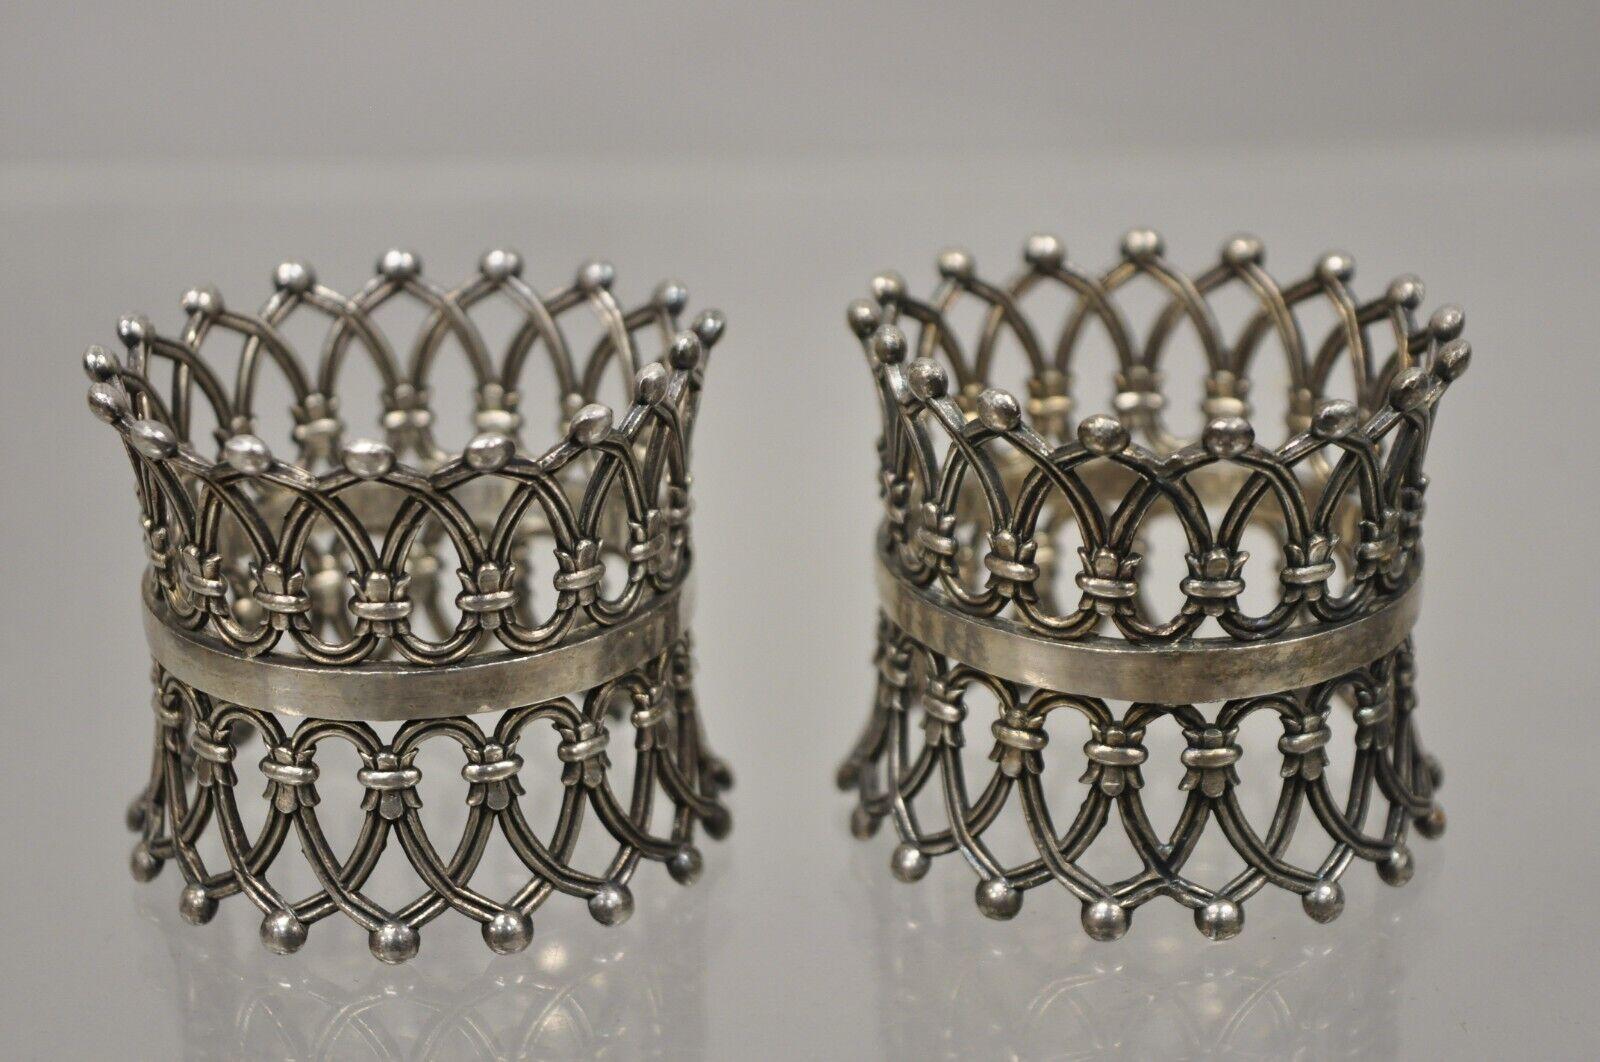 Pair of Antique English Victorian Silver Plate Pierced Fretwork Crown Napkin Rings. Item features an ornate pierced fretwork design, royal crown form, very nice antique pair. Circa Early 1900s. Measurements: 2